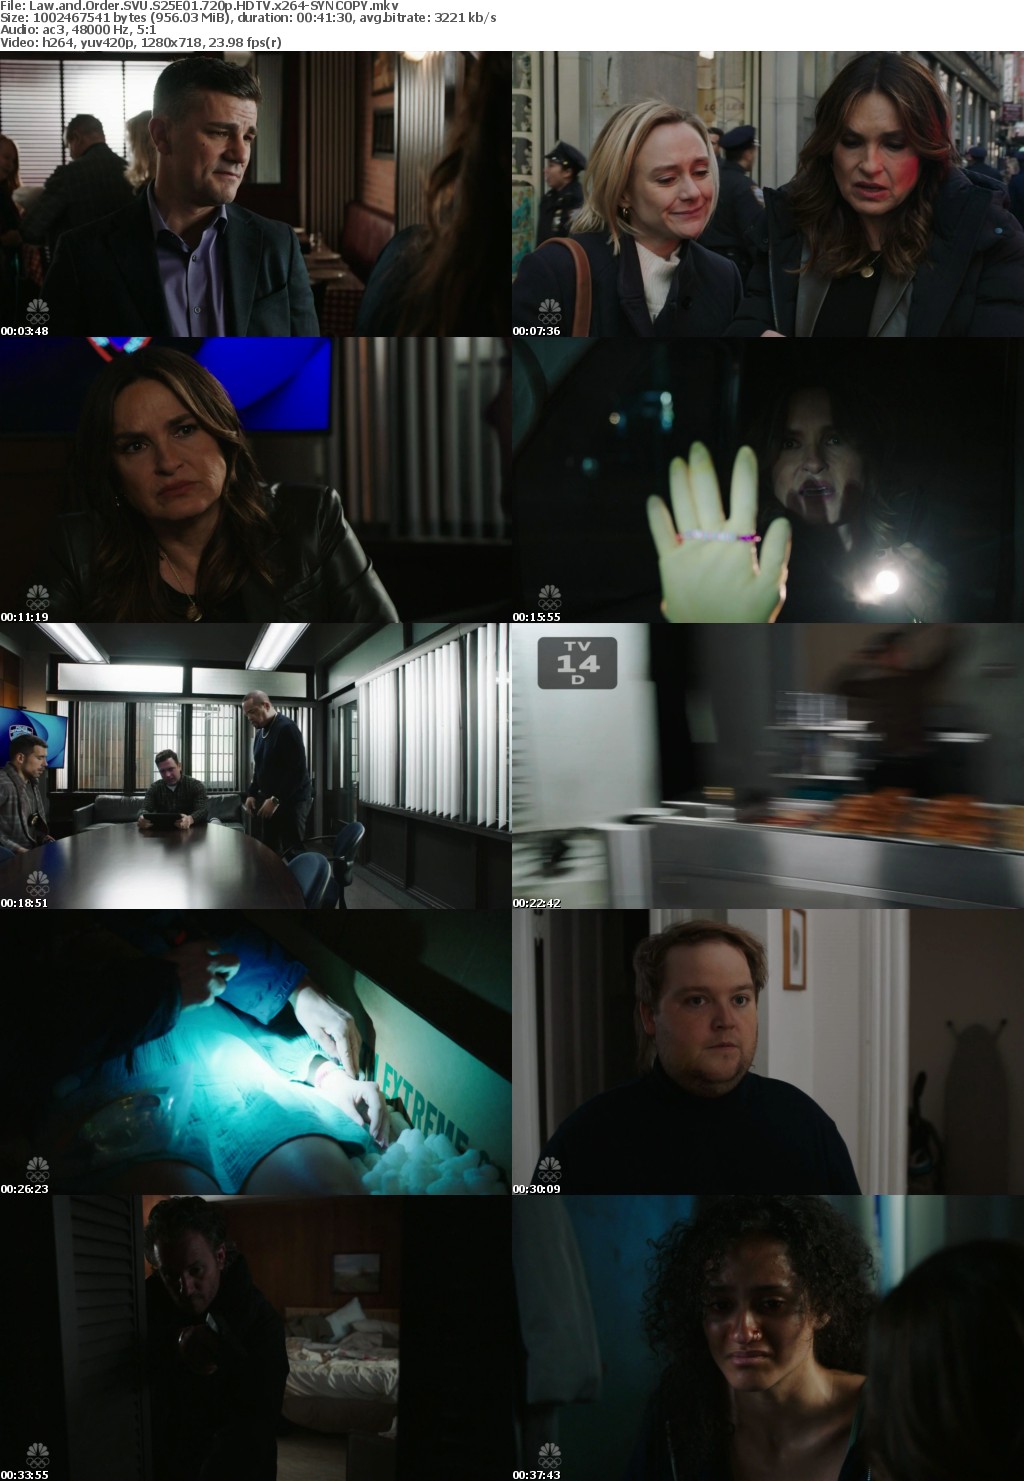 Law and Order SVU S25E01 720p HDTV x264-SYNCOPY